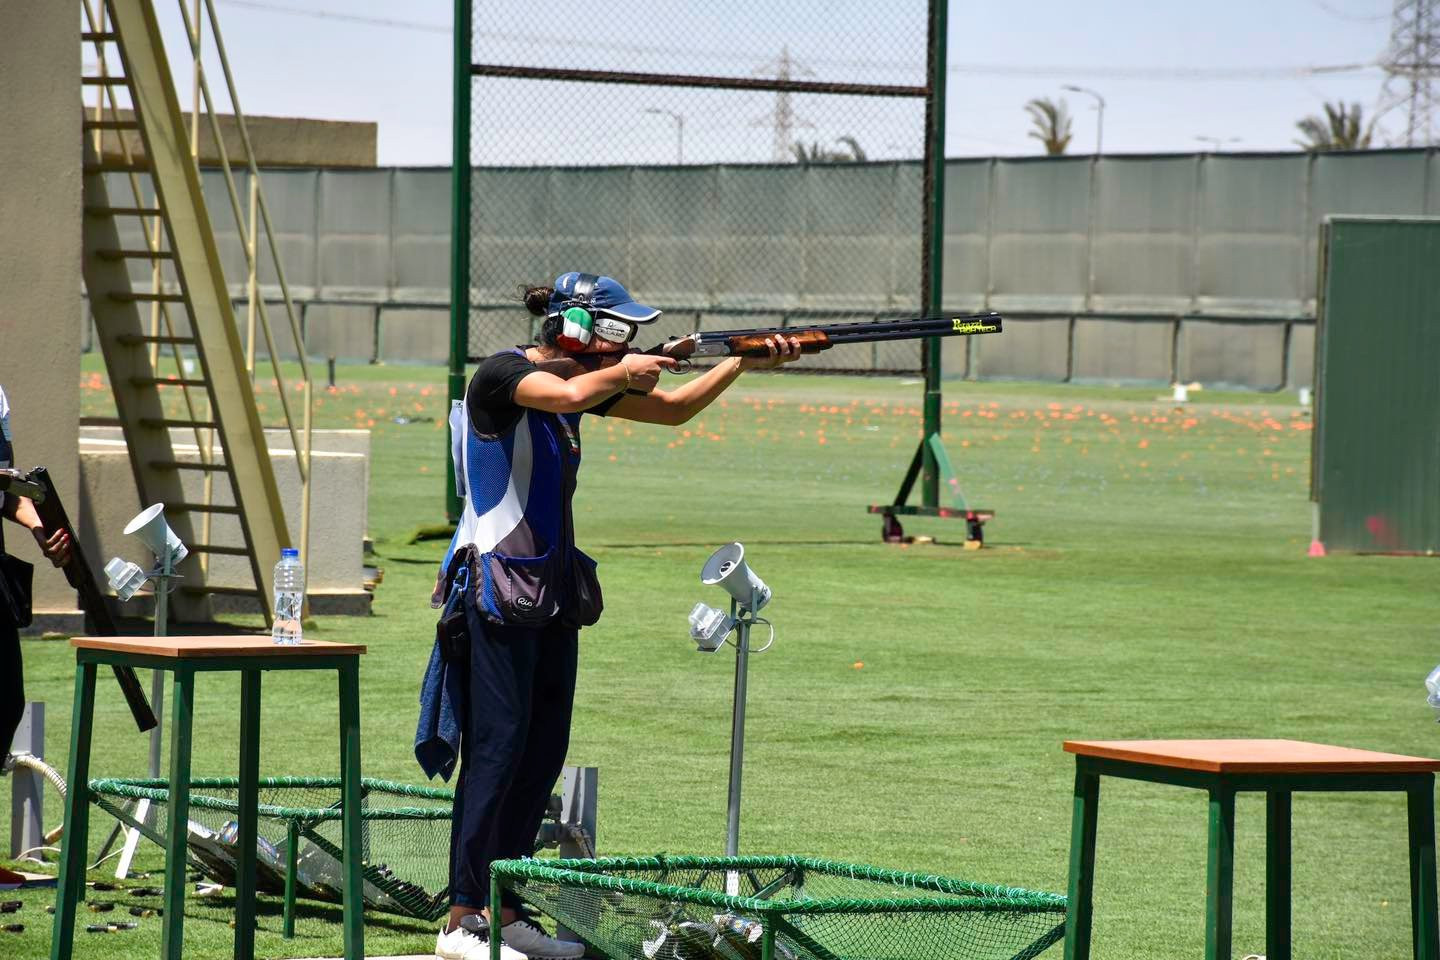 Silver medals nudge Italy to top of ISSF Shotgun World Cup standings